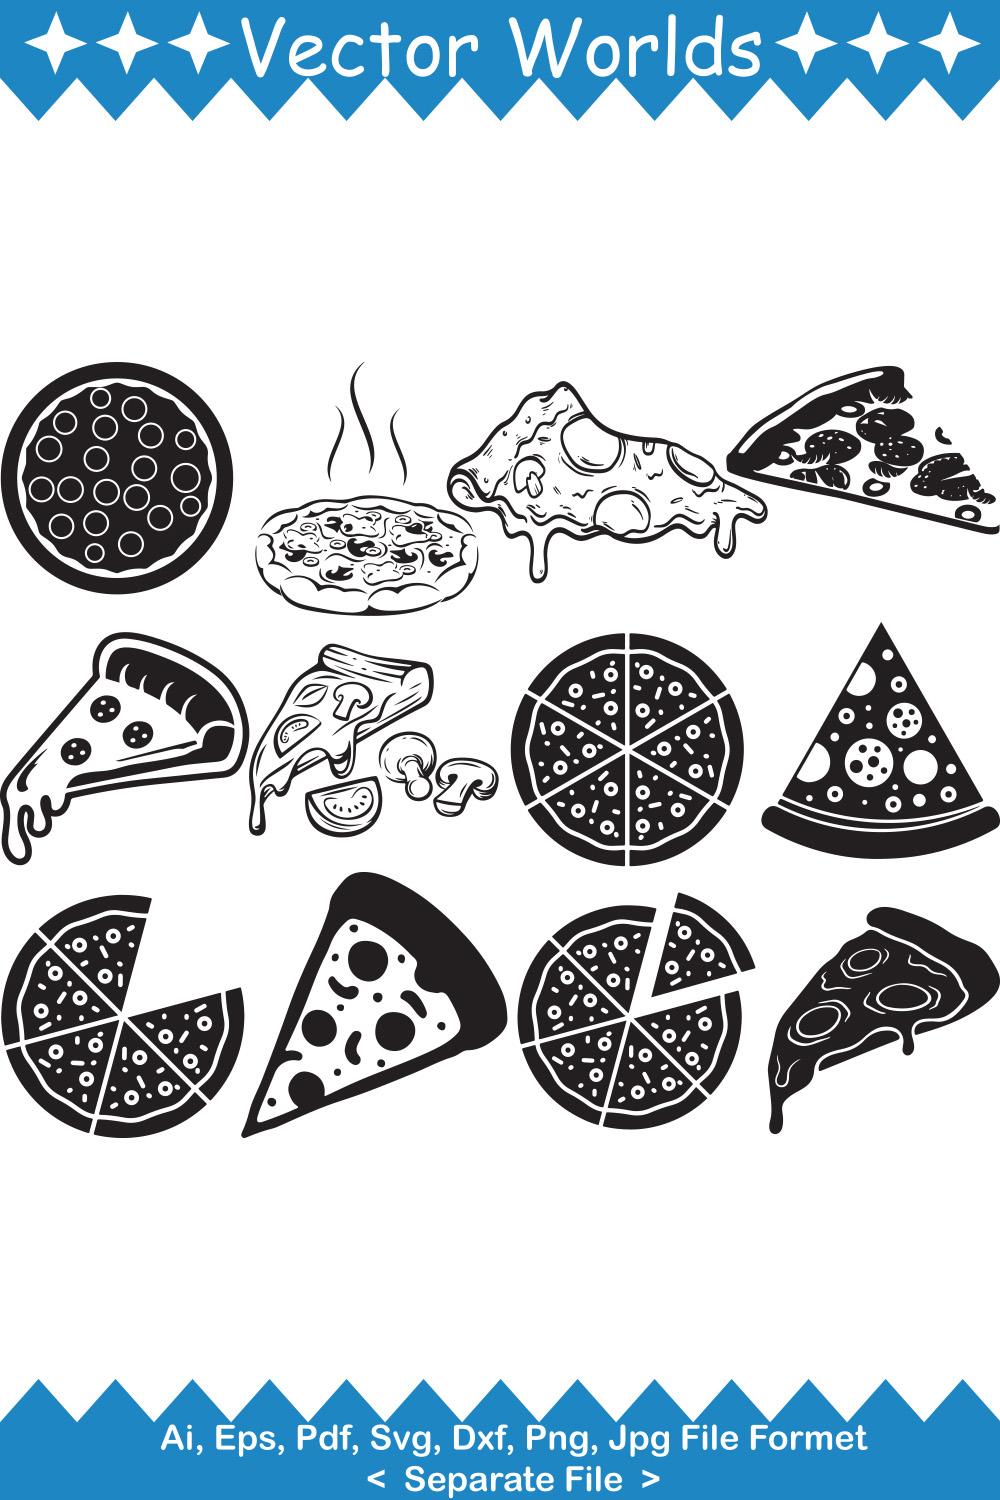 A selection of vector wonderful images of pizza silhouettes.